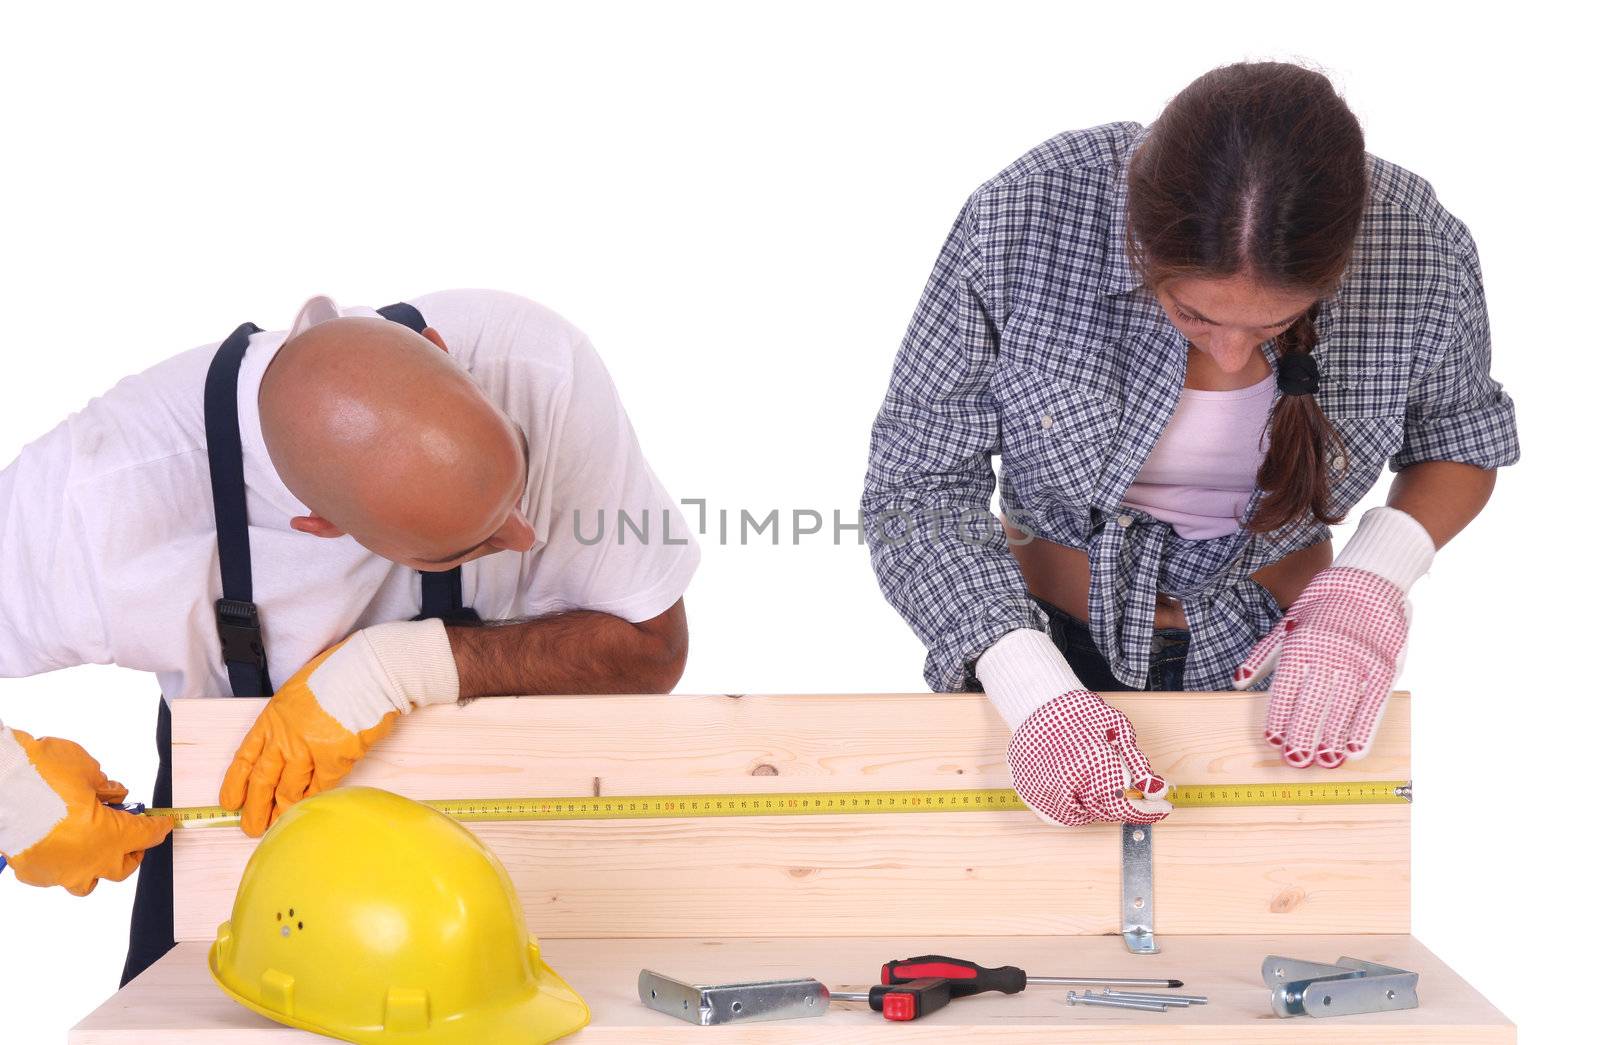 construction workers at work on white background 